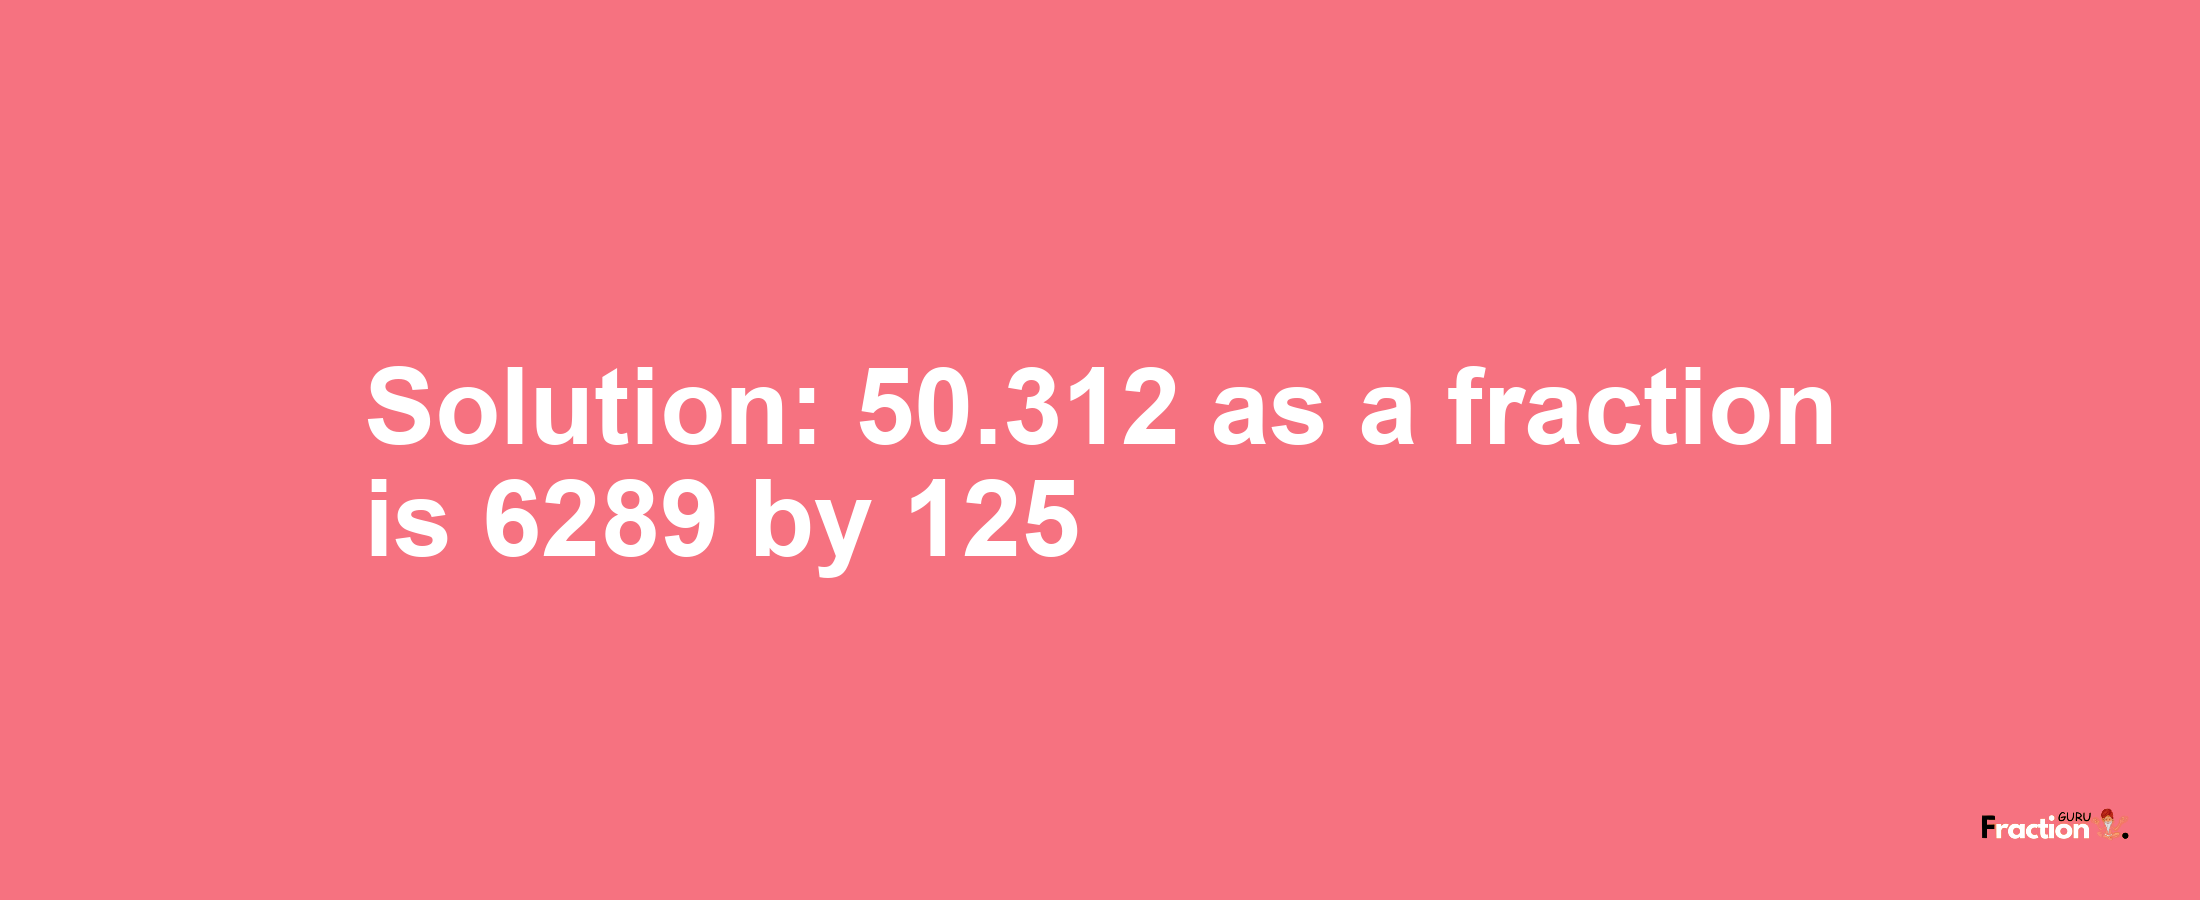 Solution:50.312 as a fraction is 6289/125